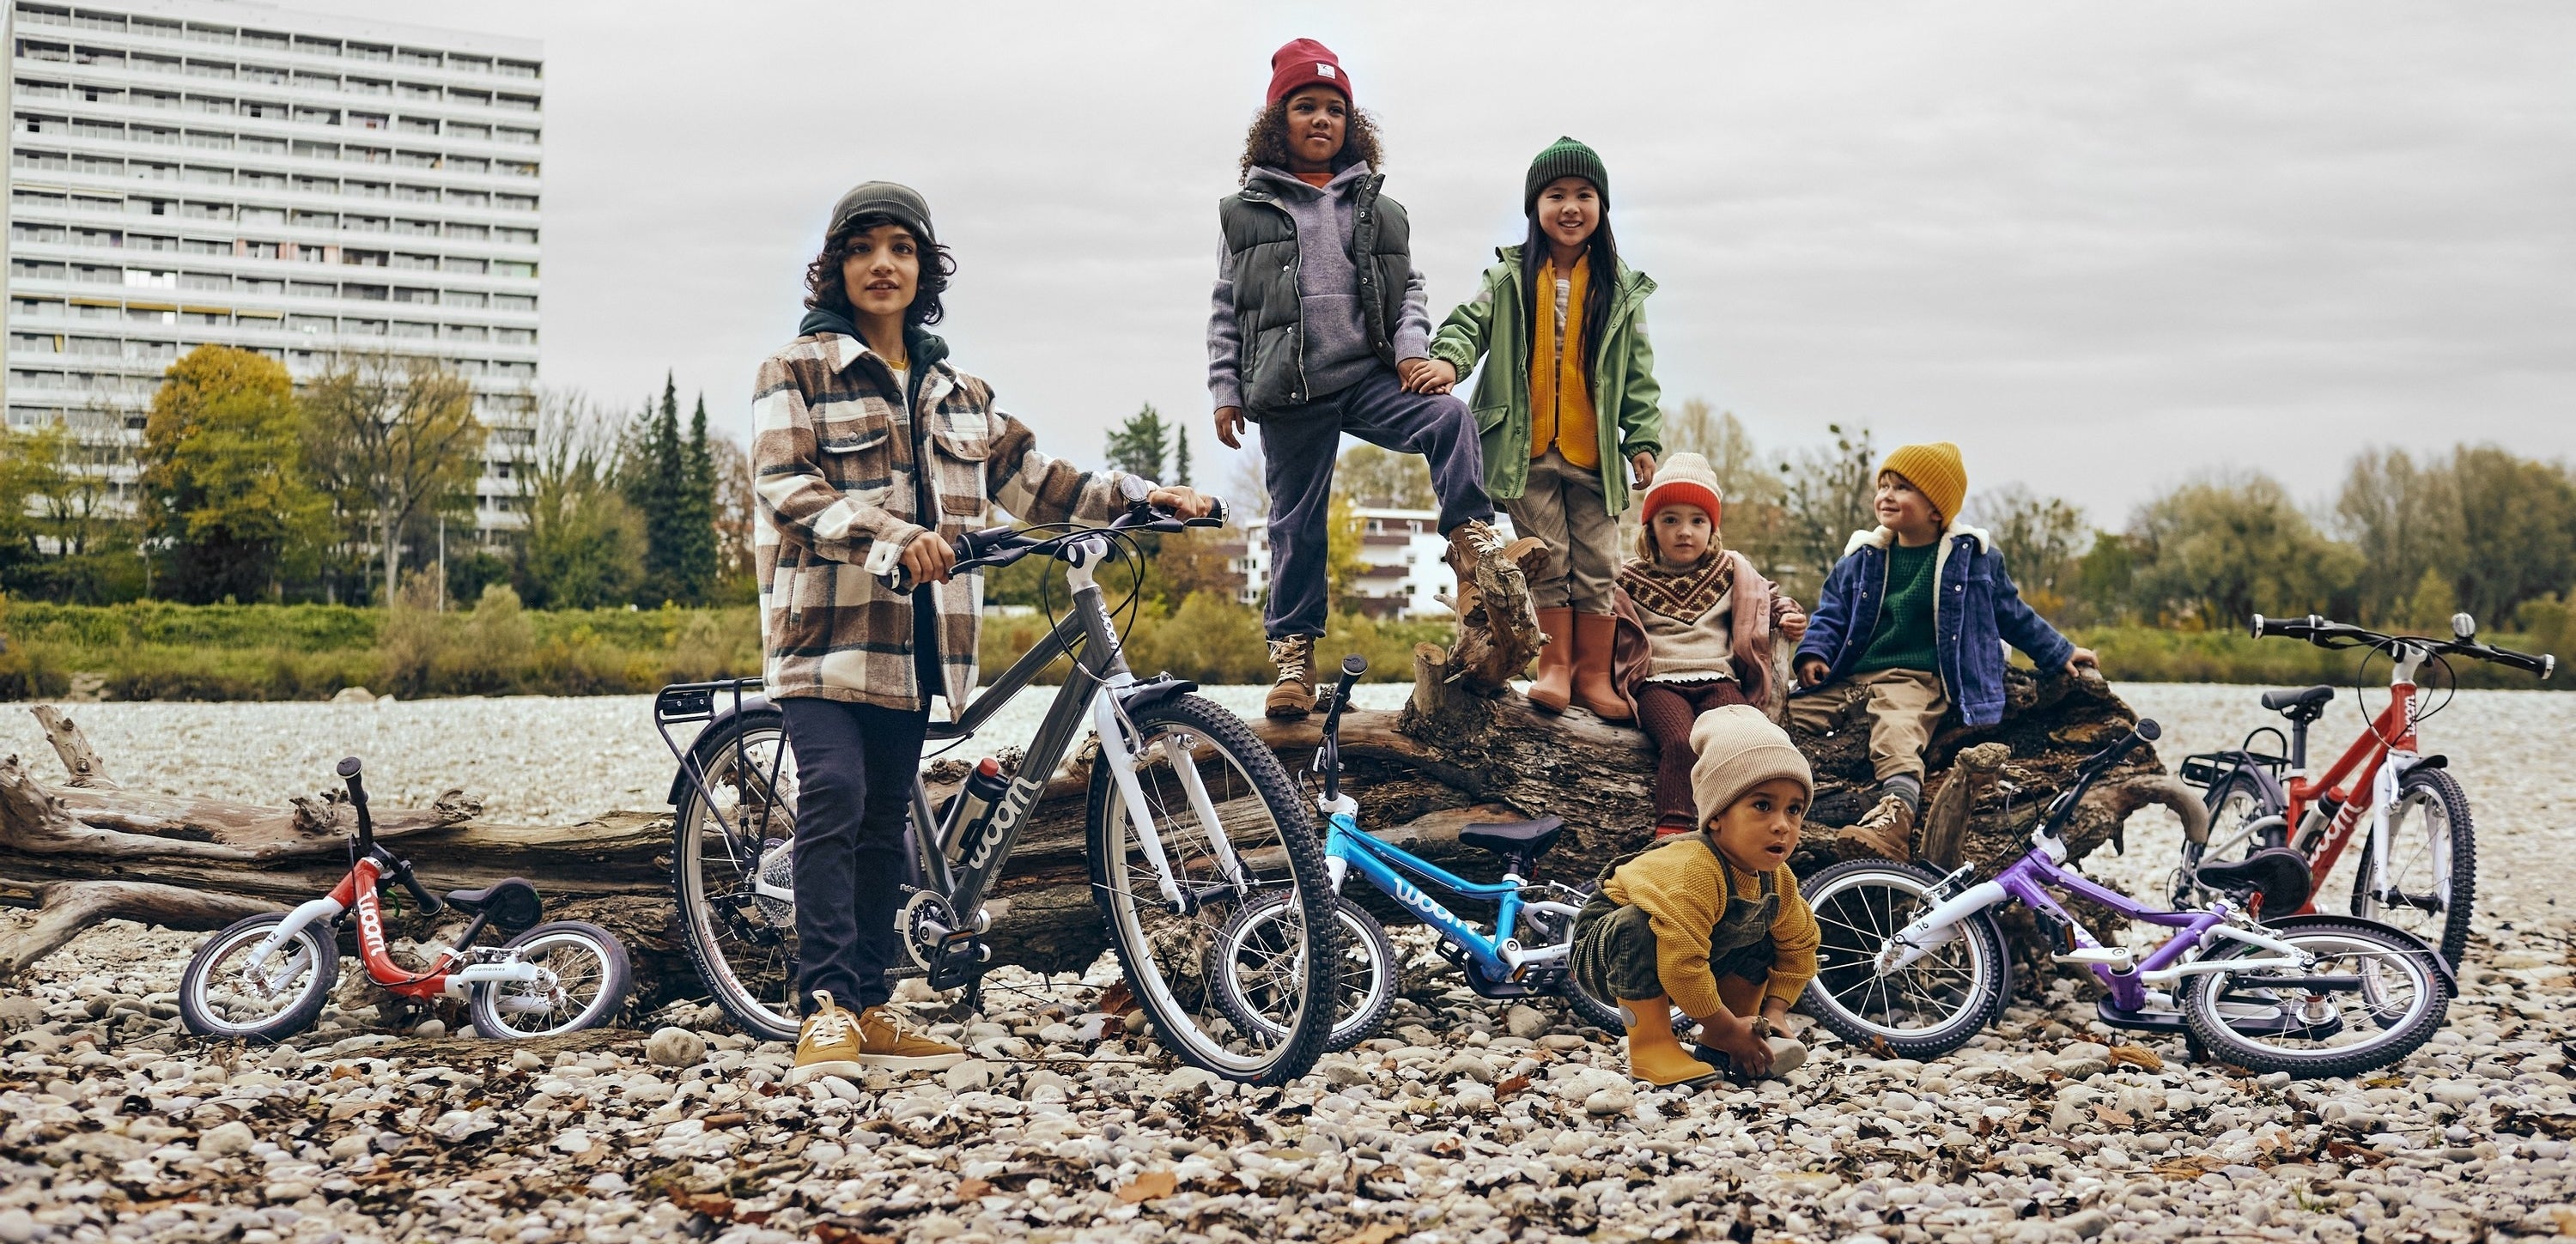 Group of child models of varying ages with varying colorful bikes